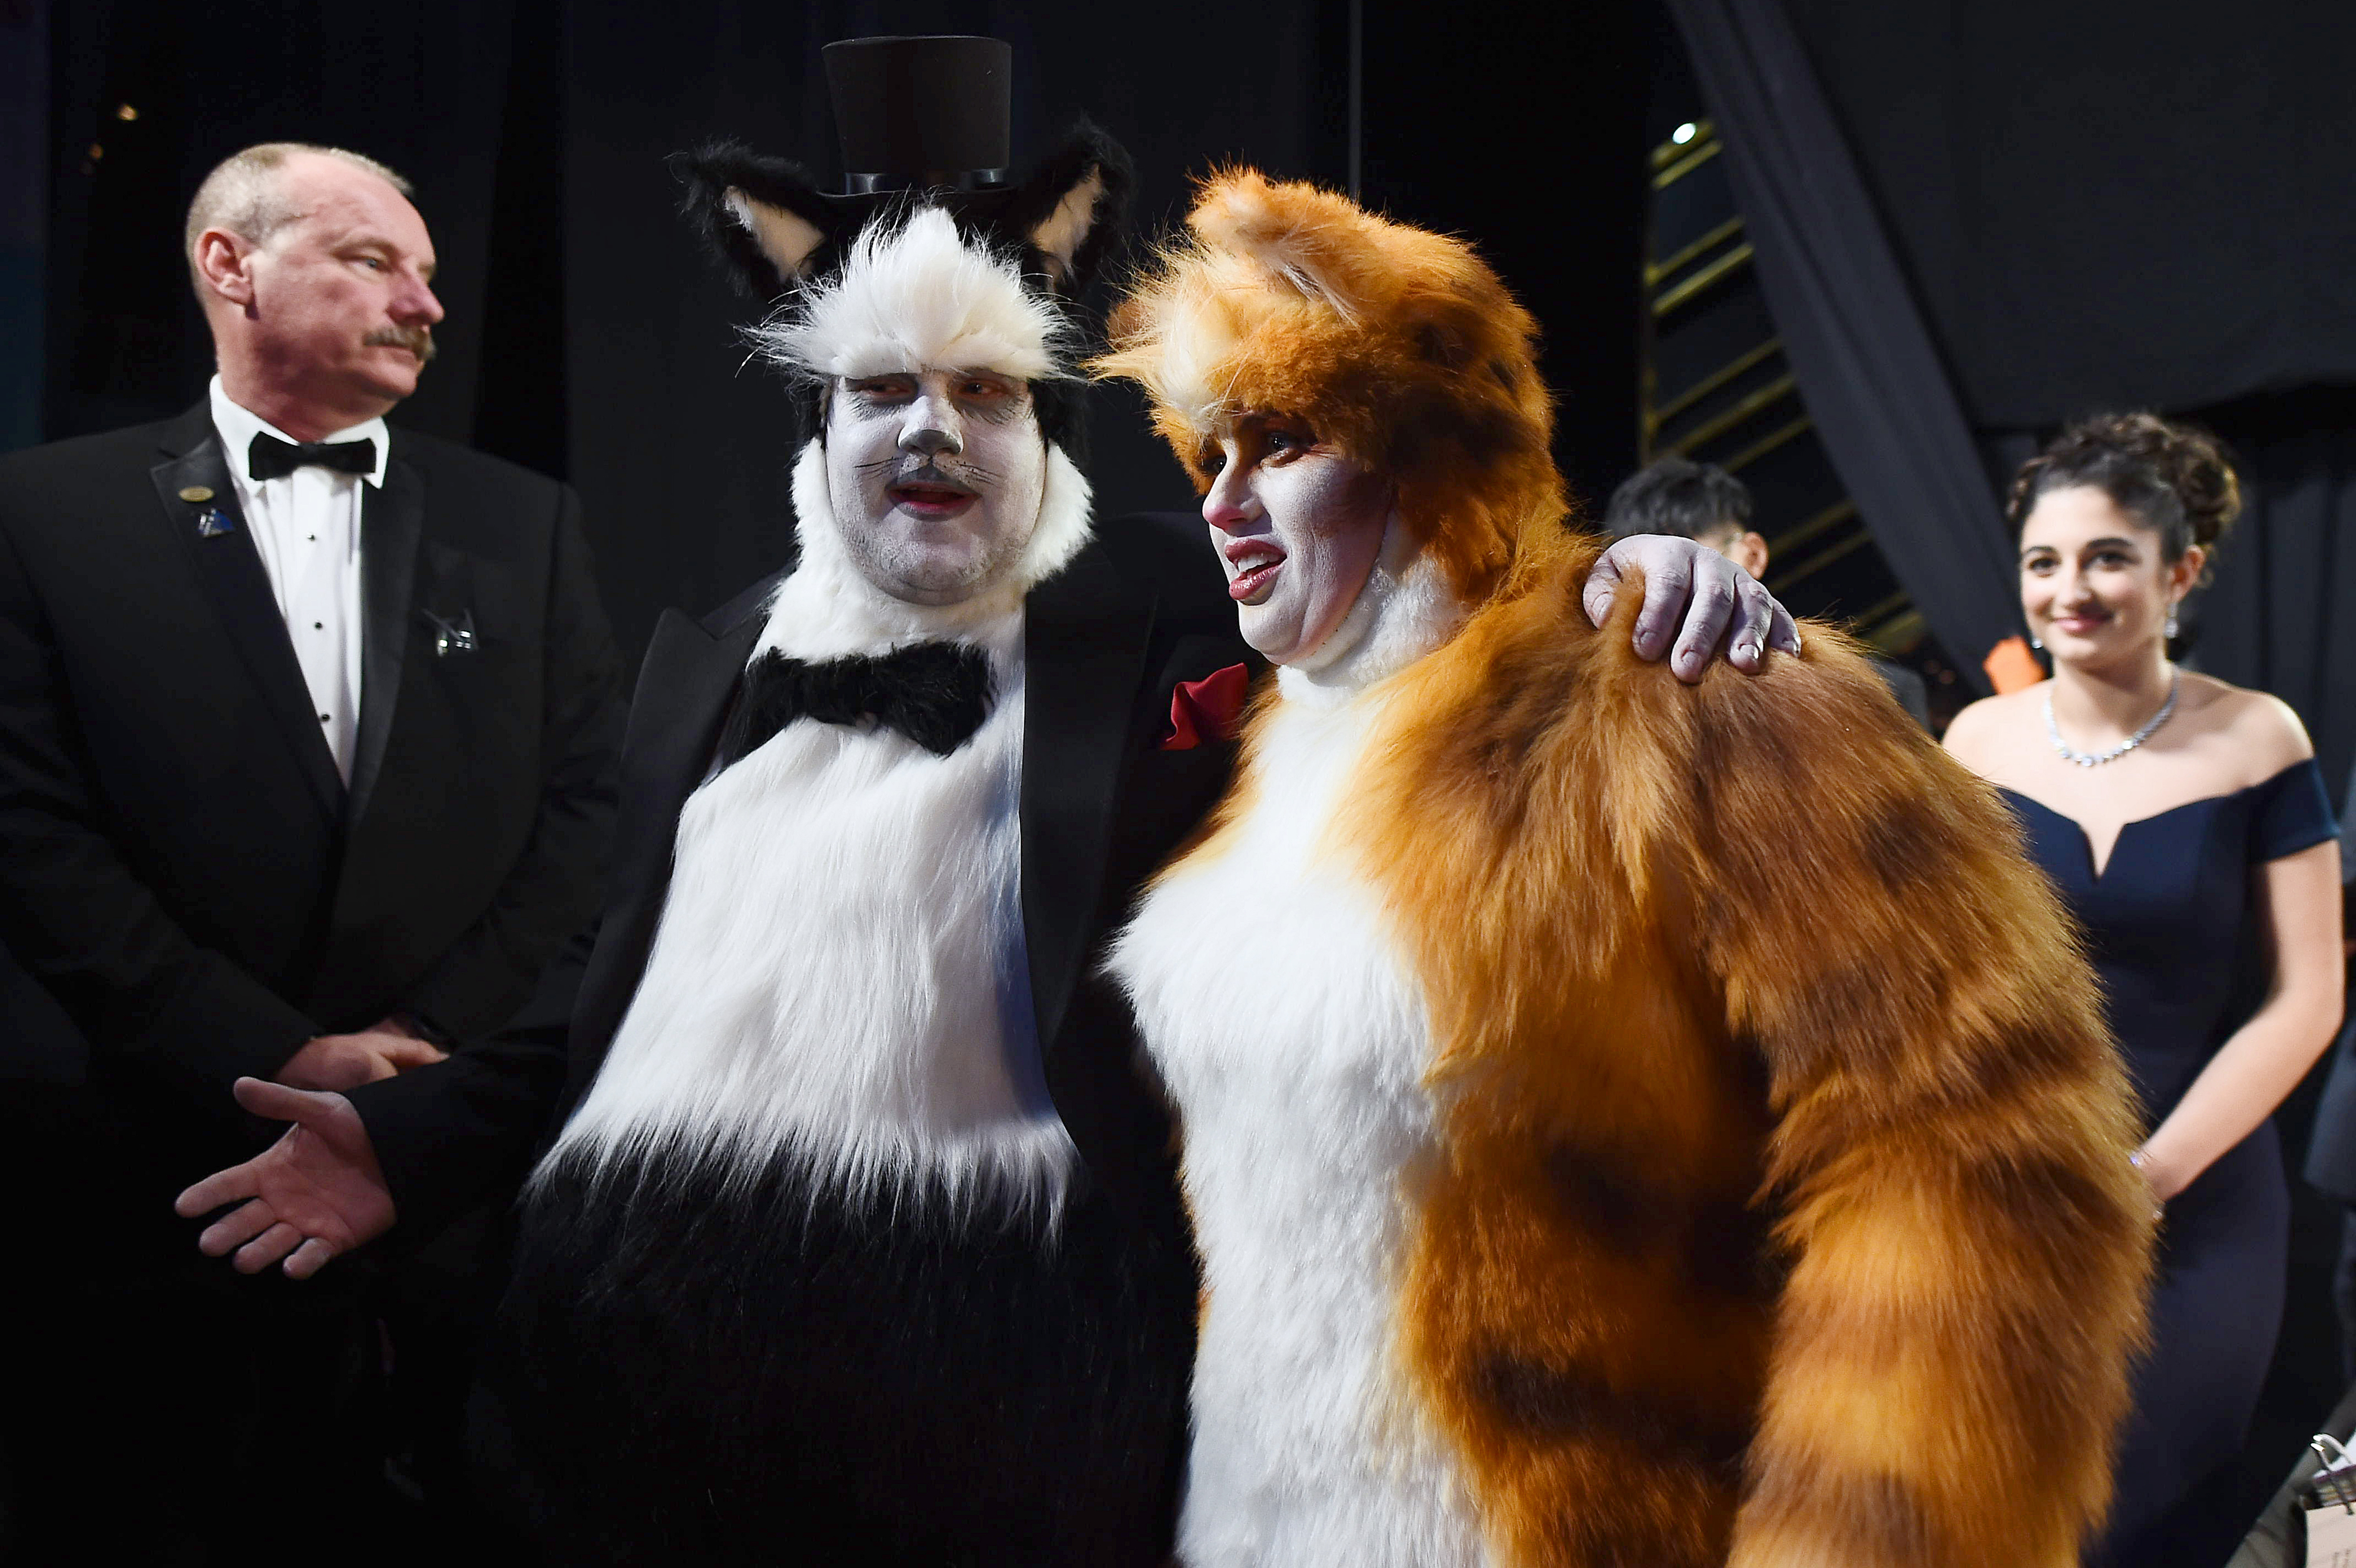 Two people in elaborate &quot;Cats&quot; musical costumes with theatrical makeup, posing with others at an event